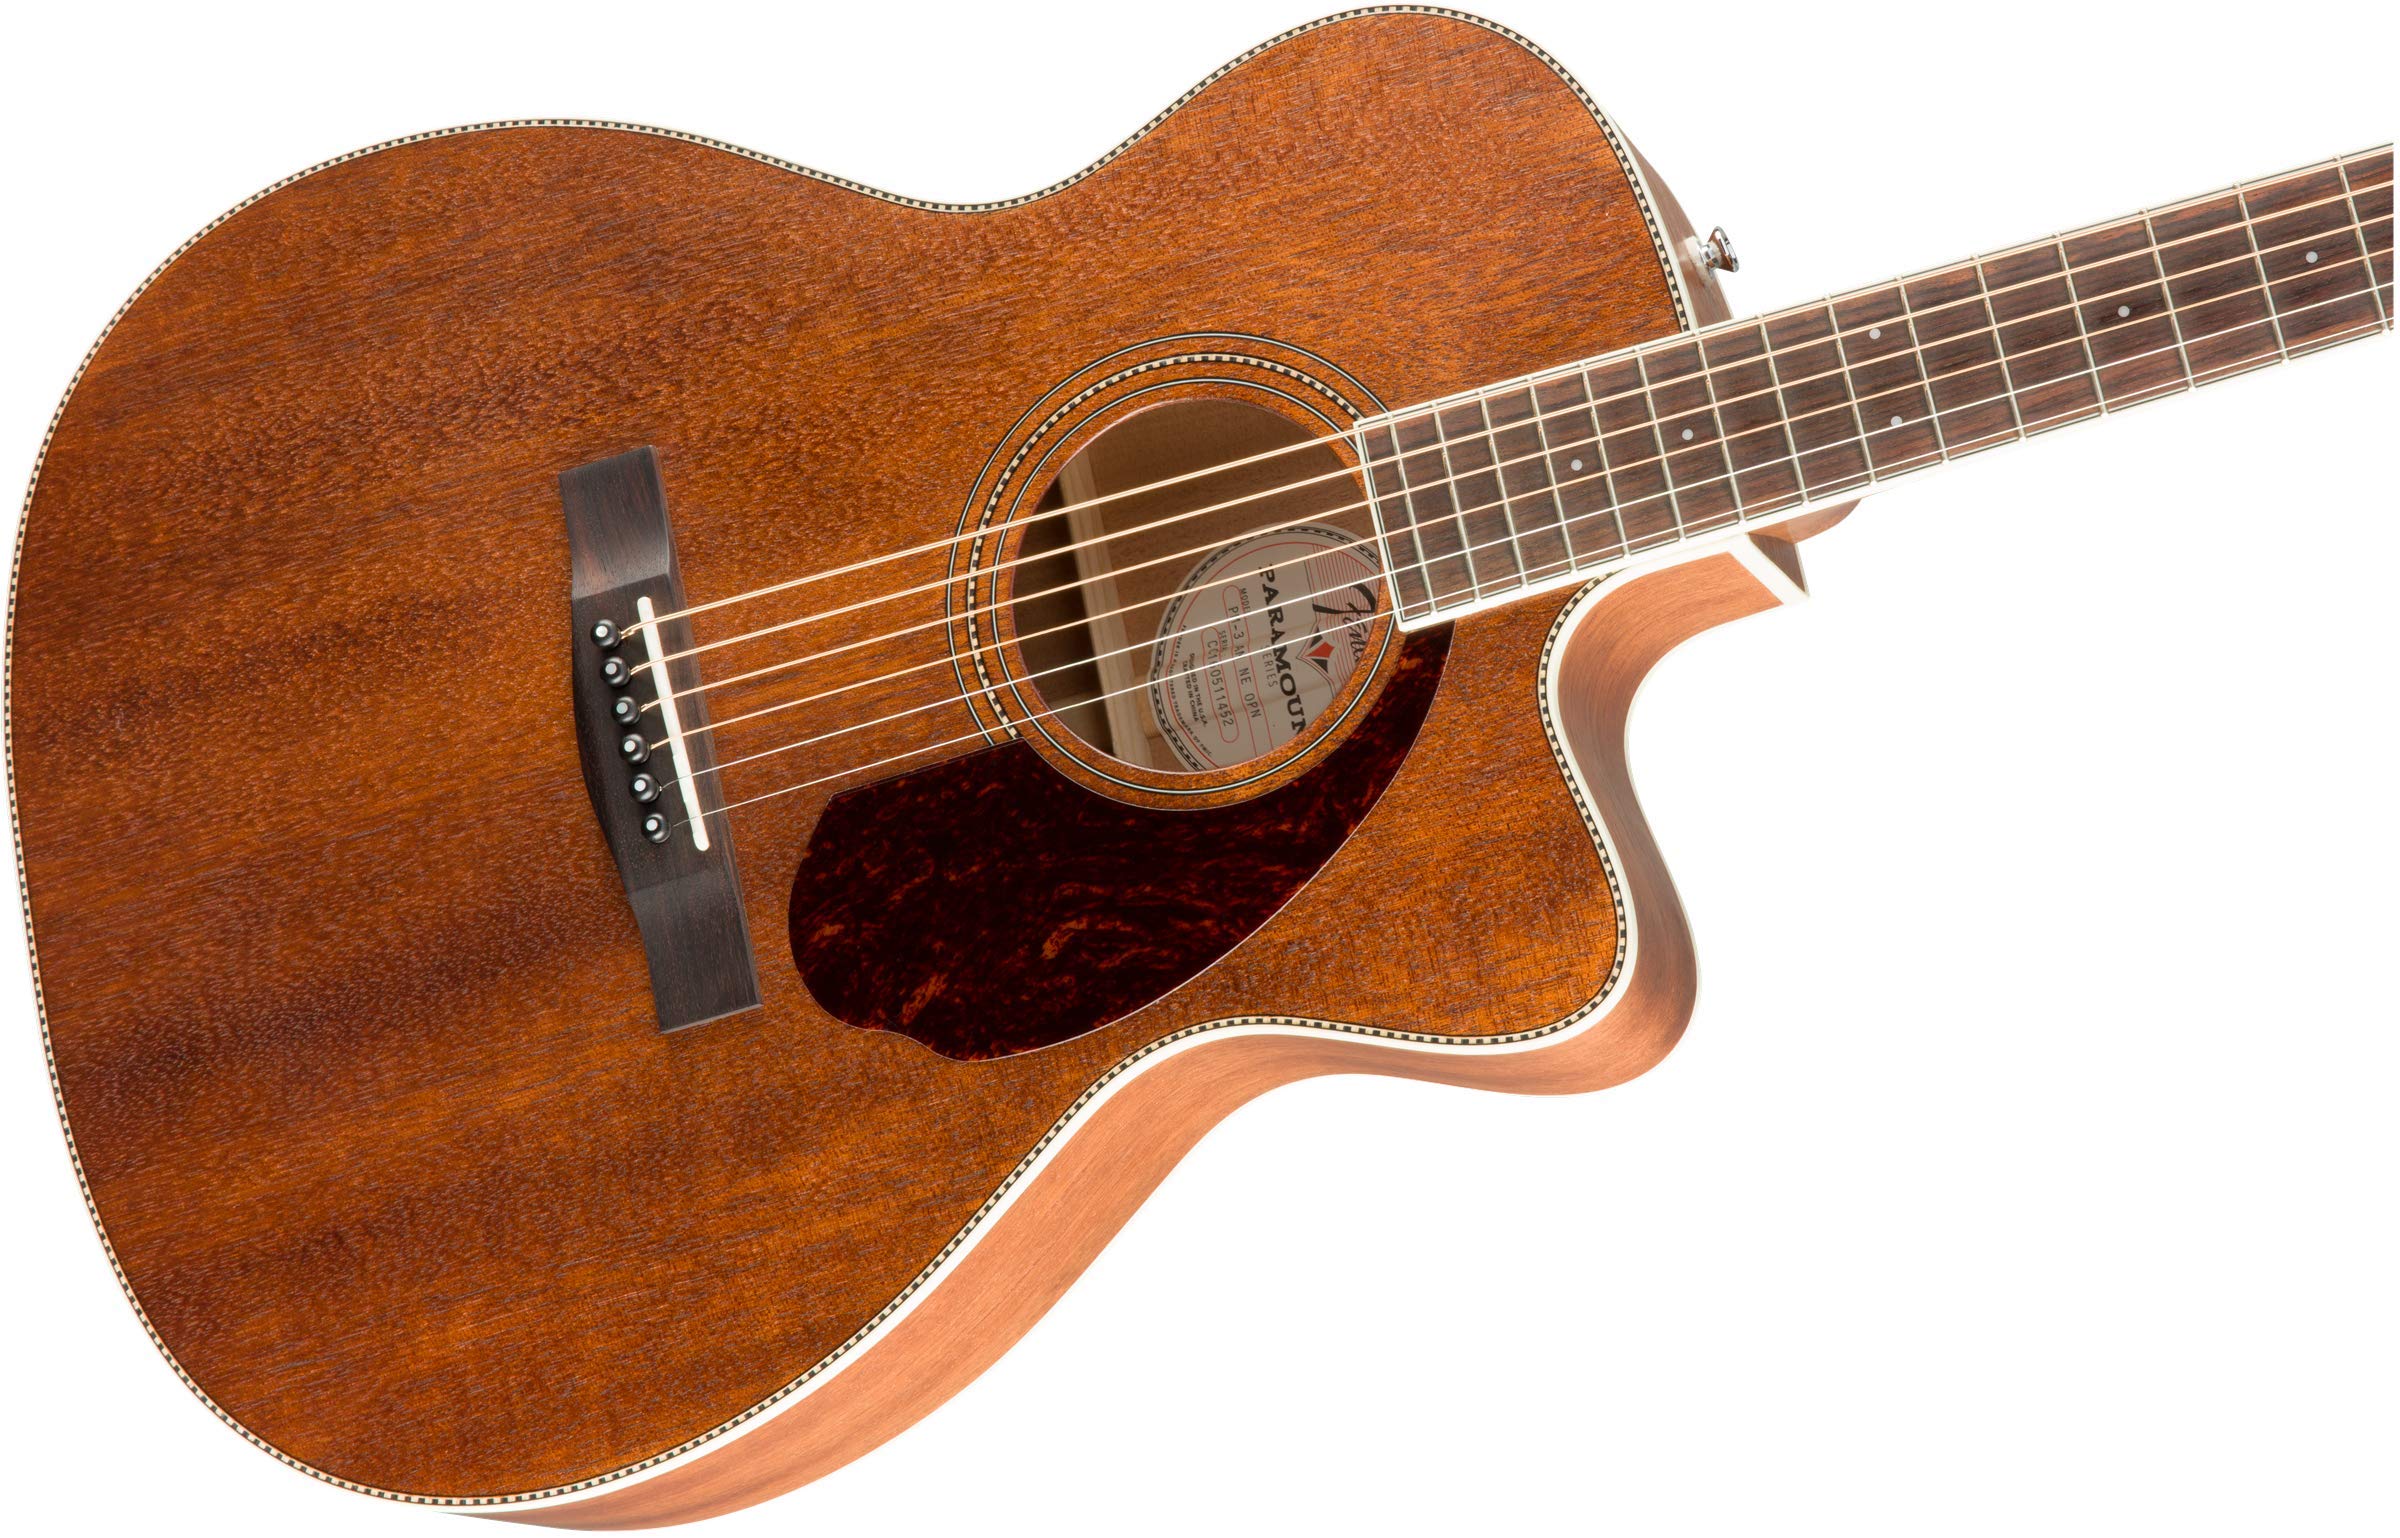 Fender Paramount PM-3 All-Mahogany Triple-0 Acoustic Guitar with Case - $270 with 20% coupon